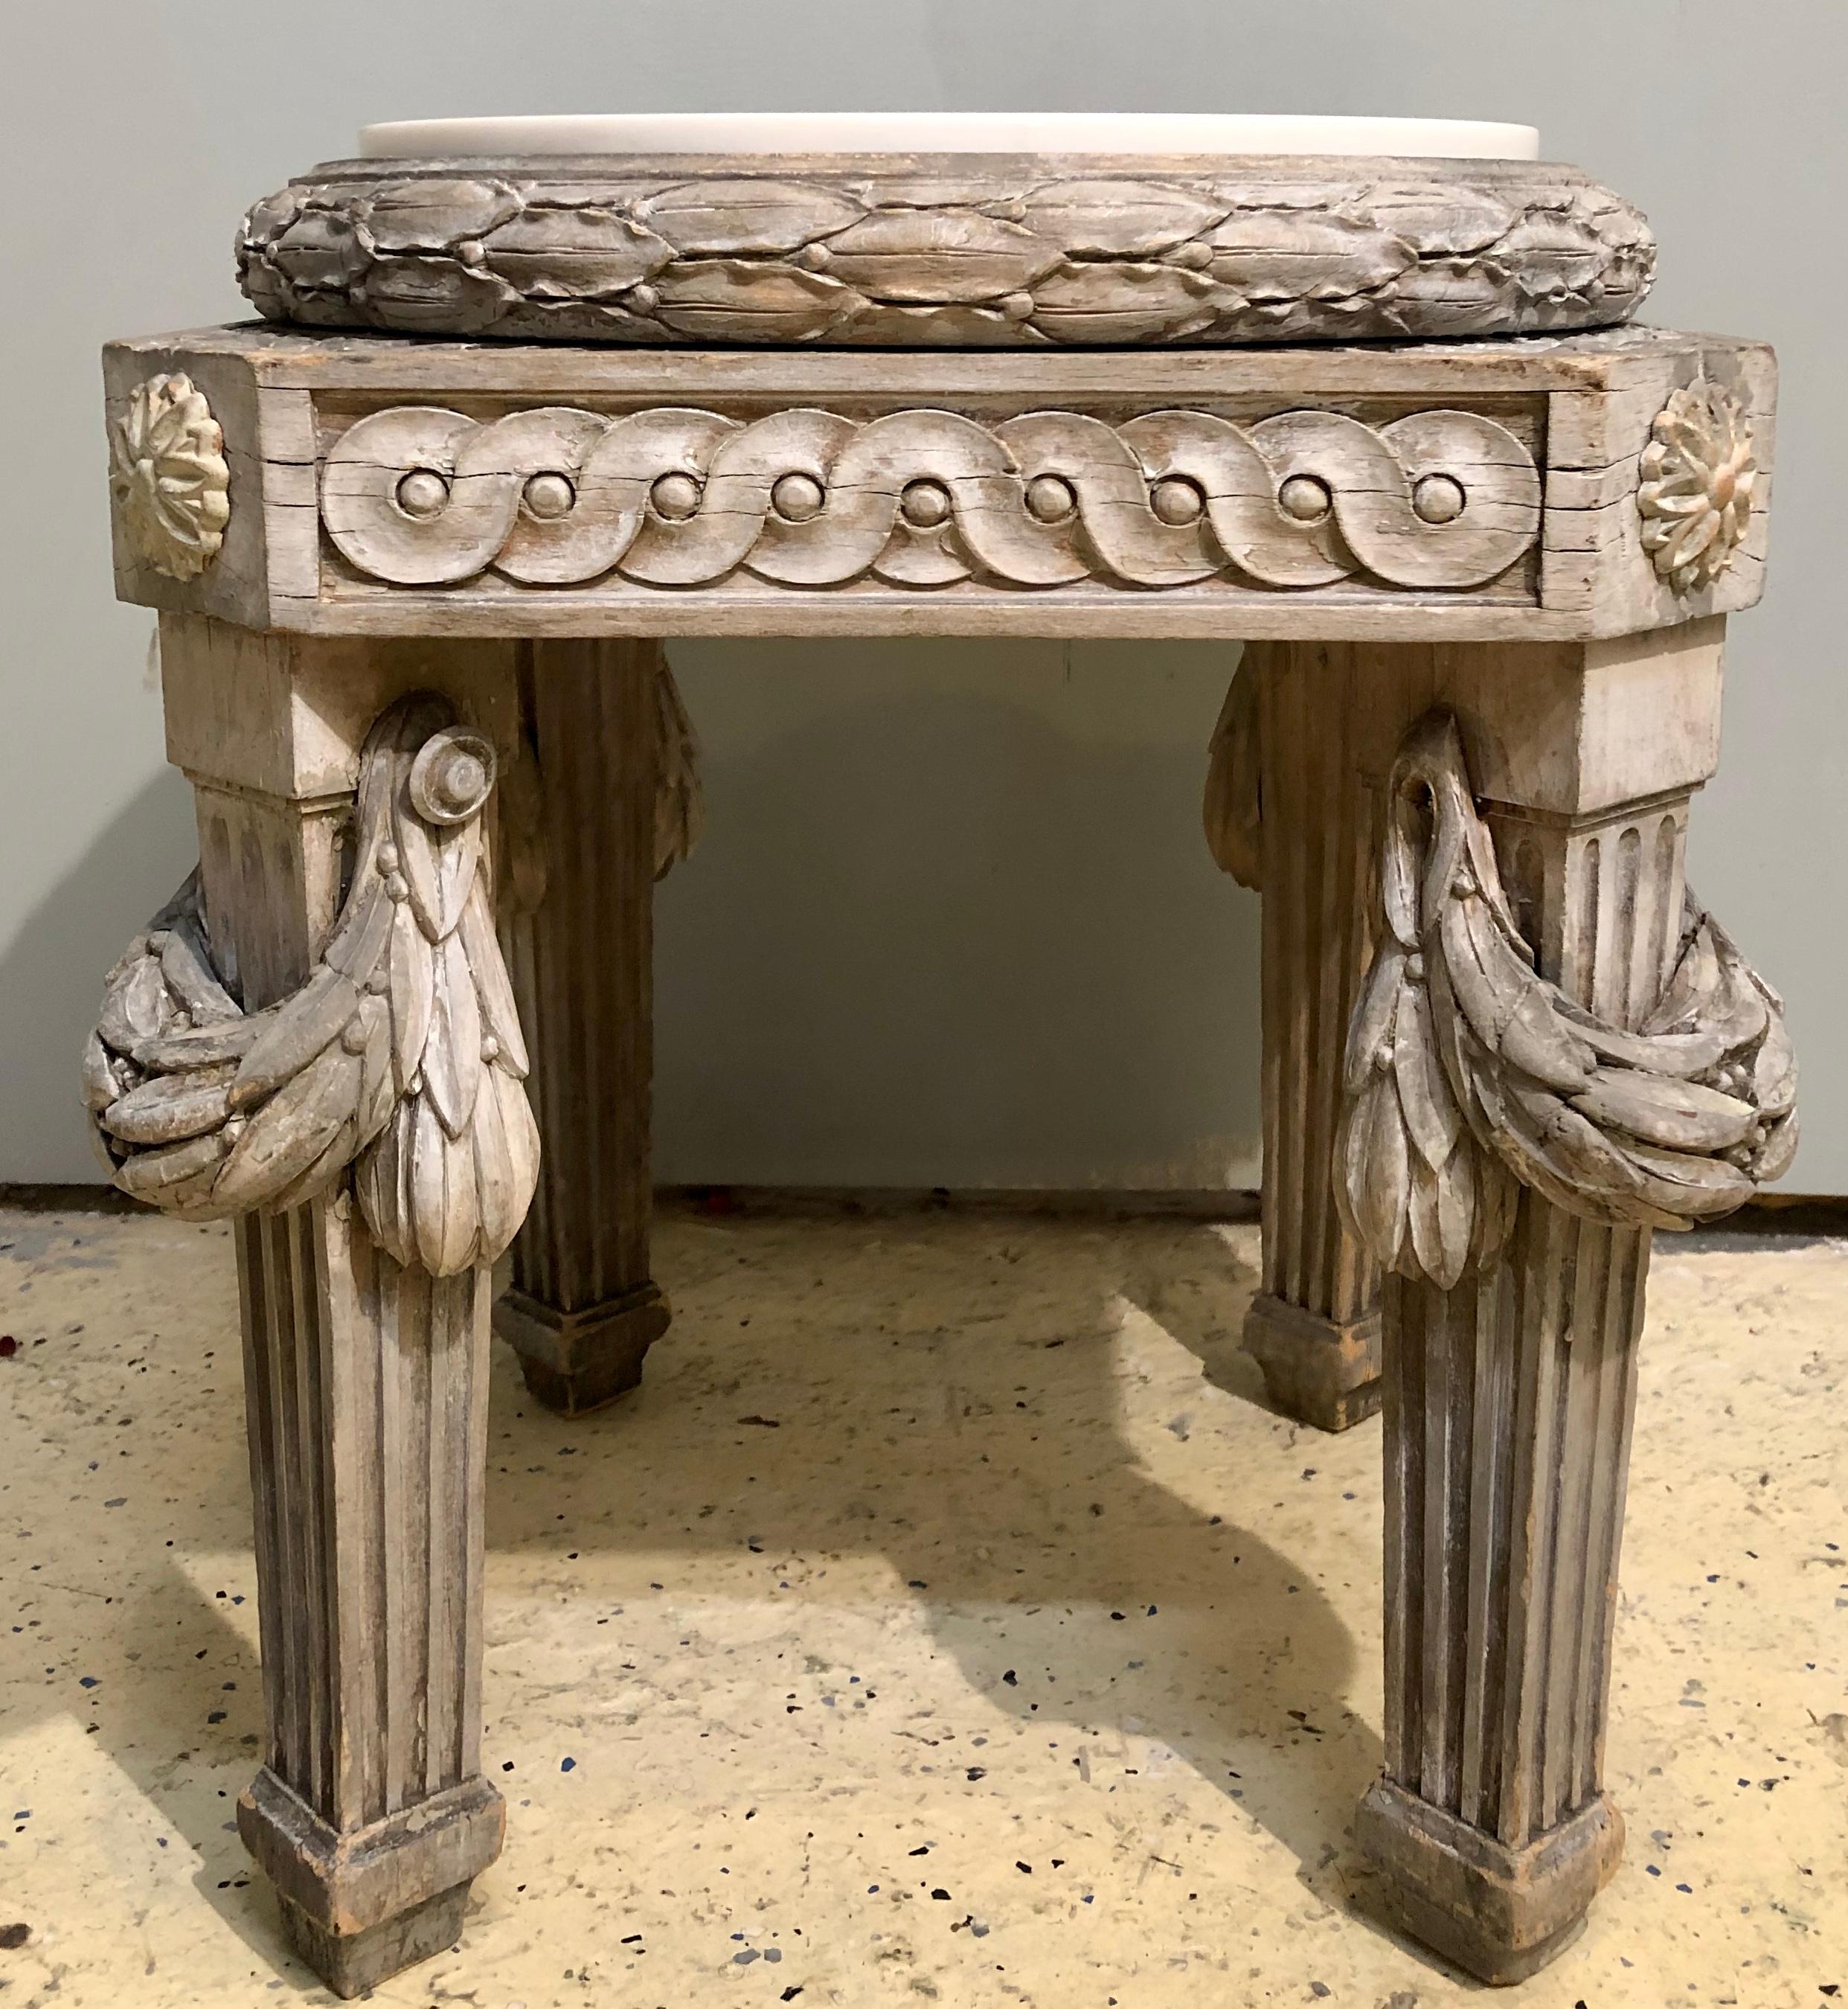 Gray painted Swedish stool with new marble top 19th century beechwood. Simply the sweetest little bench having a later date white marble top as it was used as a pedestal.

Provenance:
A Greenwich CT Estate.
Philippe Vichot
Christie's, France.